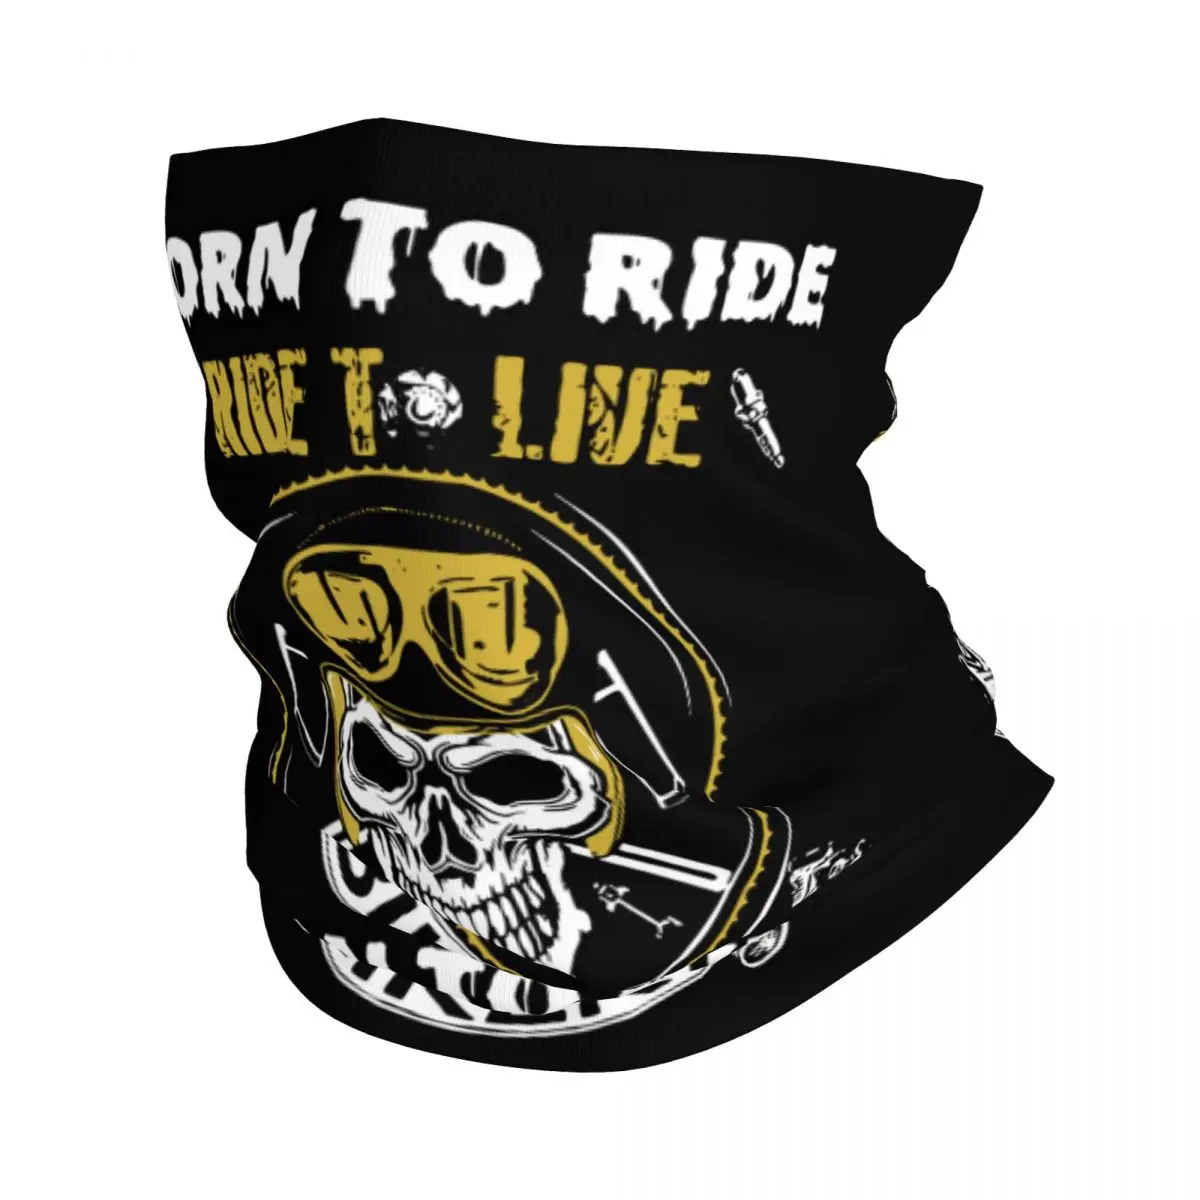 

Bikers Born To Ride Bandana Neck Cover Printed Motorcyclist Wrap Scarf Warm Cycling Scarf Running Unisex Adult Winter